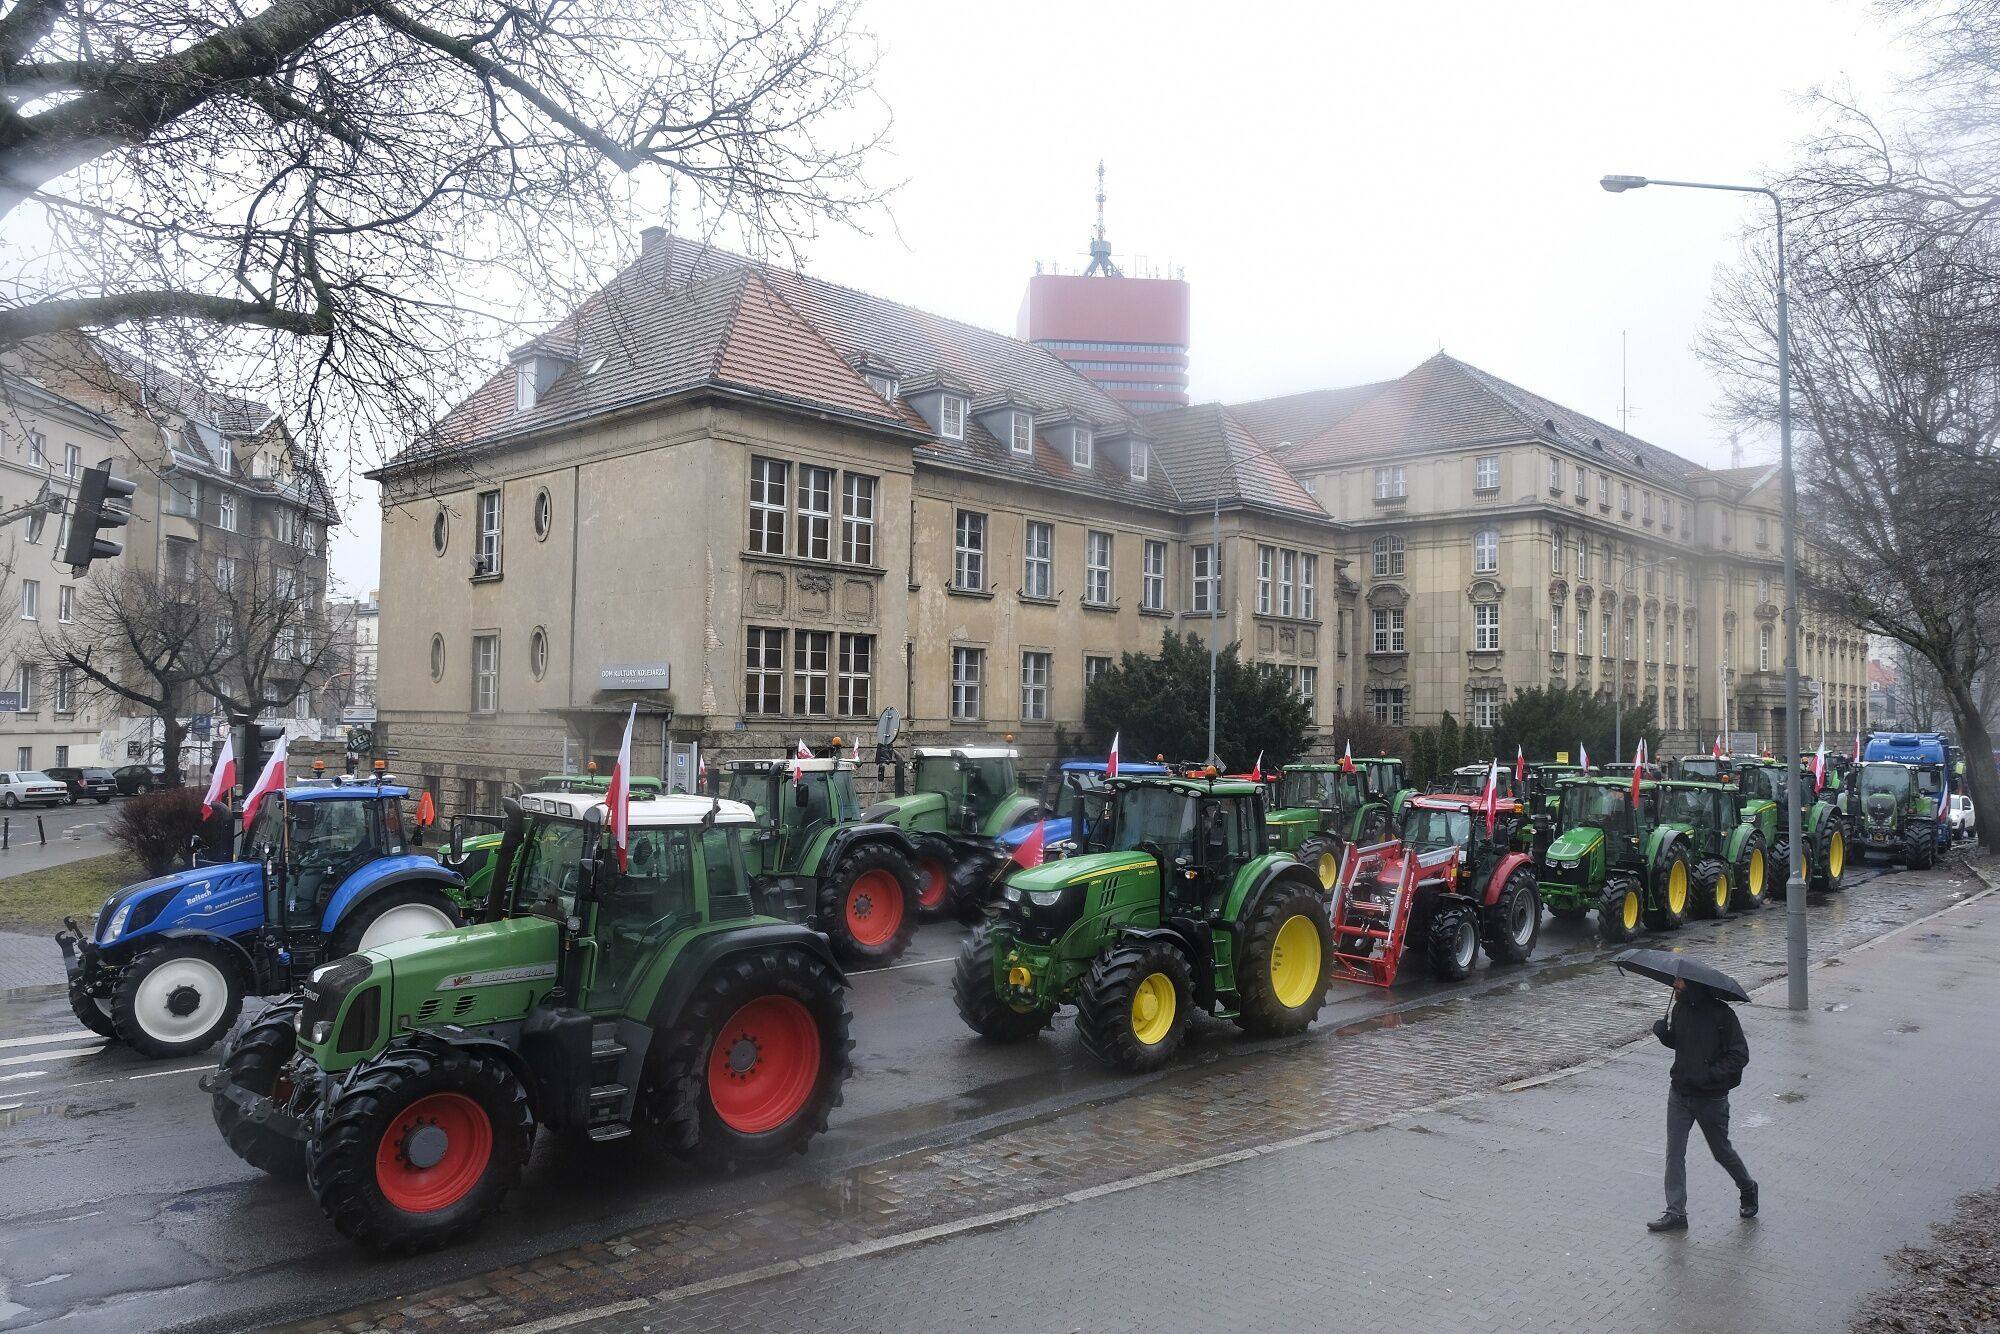 Tractors block a road during a protest by Polish farmers in Poznan, Poland, on Friday. Farmers are holding blockades across the country. Photo: Bloomberg